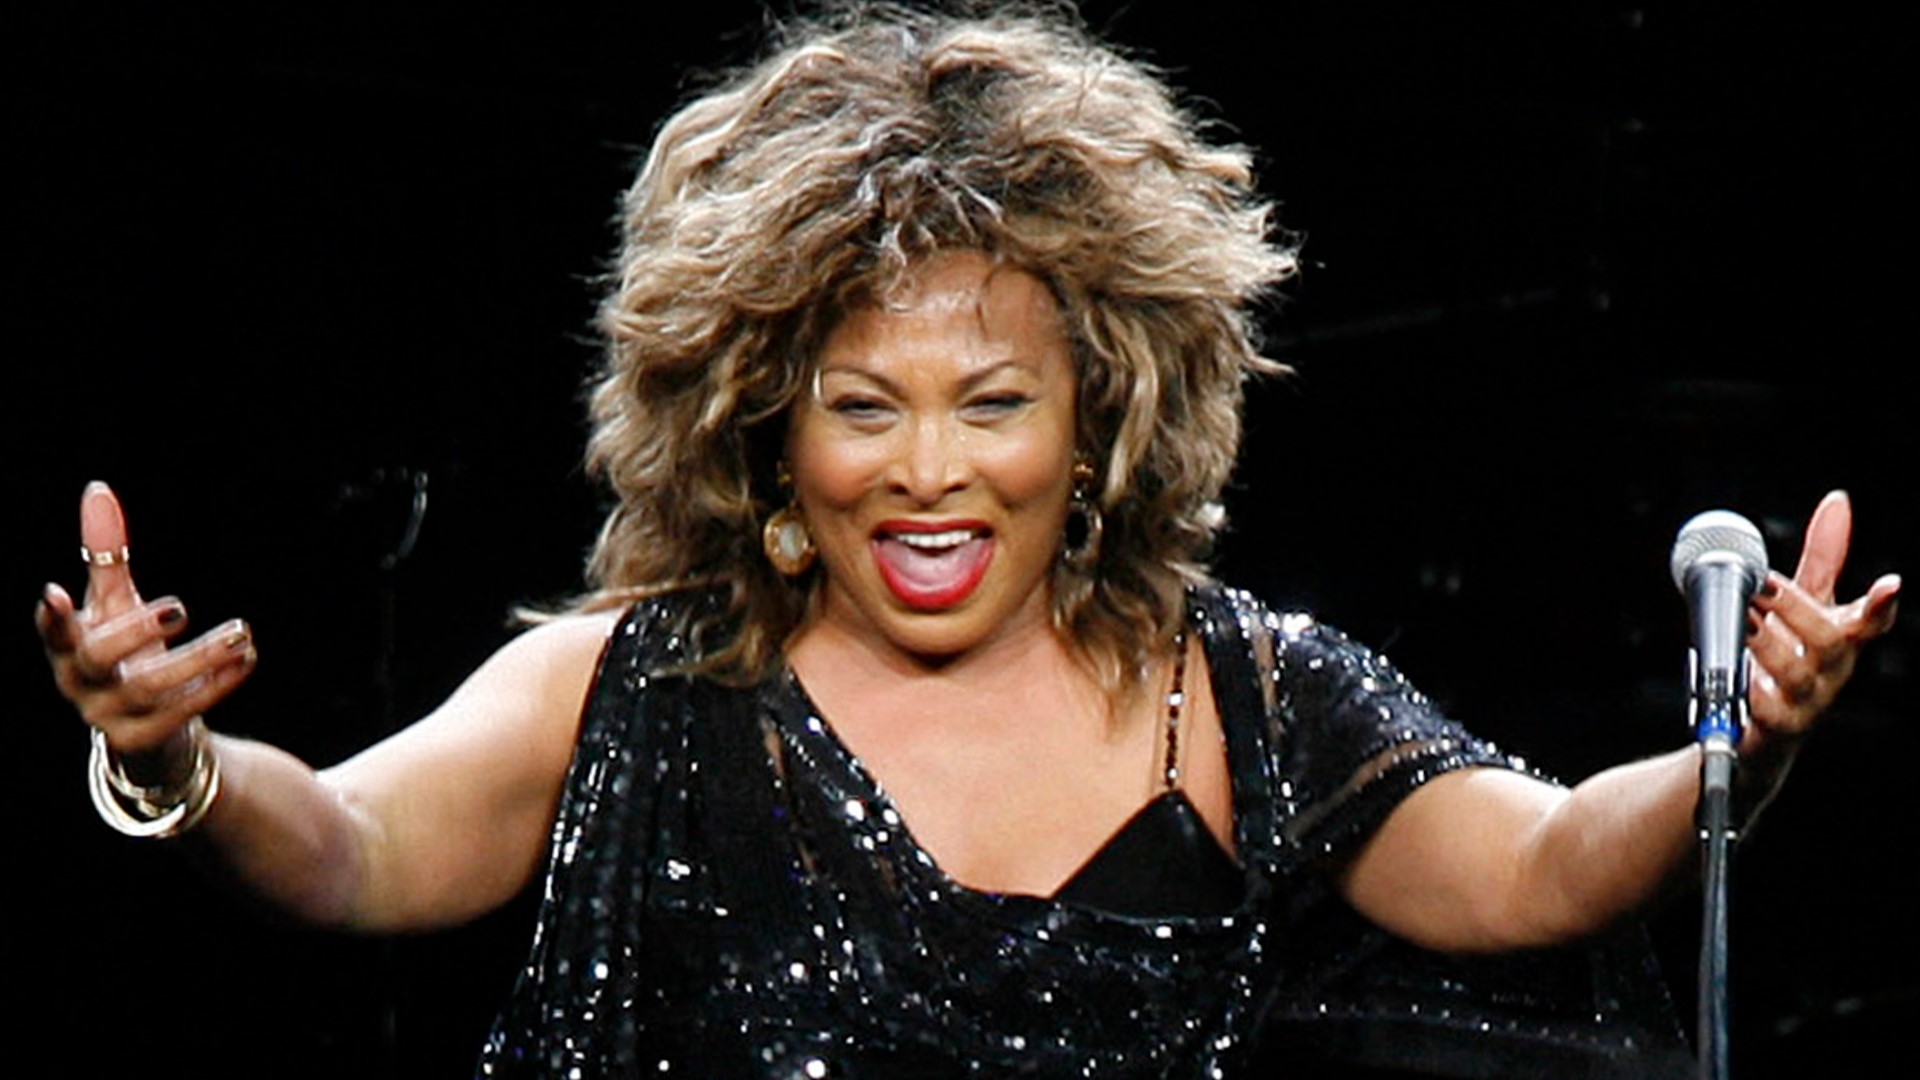 Tina Turner has died at 83 after a long illness in her home in Switzerland. The unstoppable singer and stage performer won 7 Grammys throughout her legendary career.